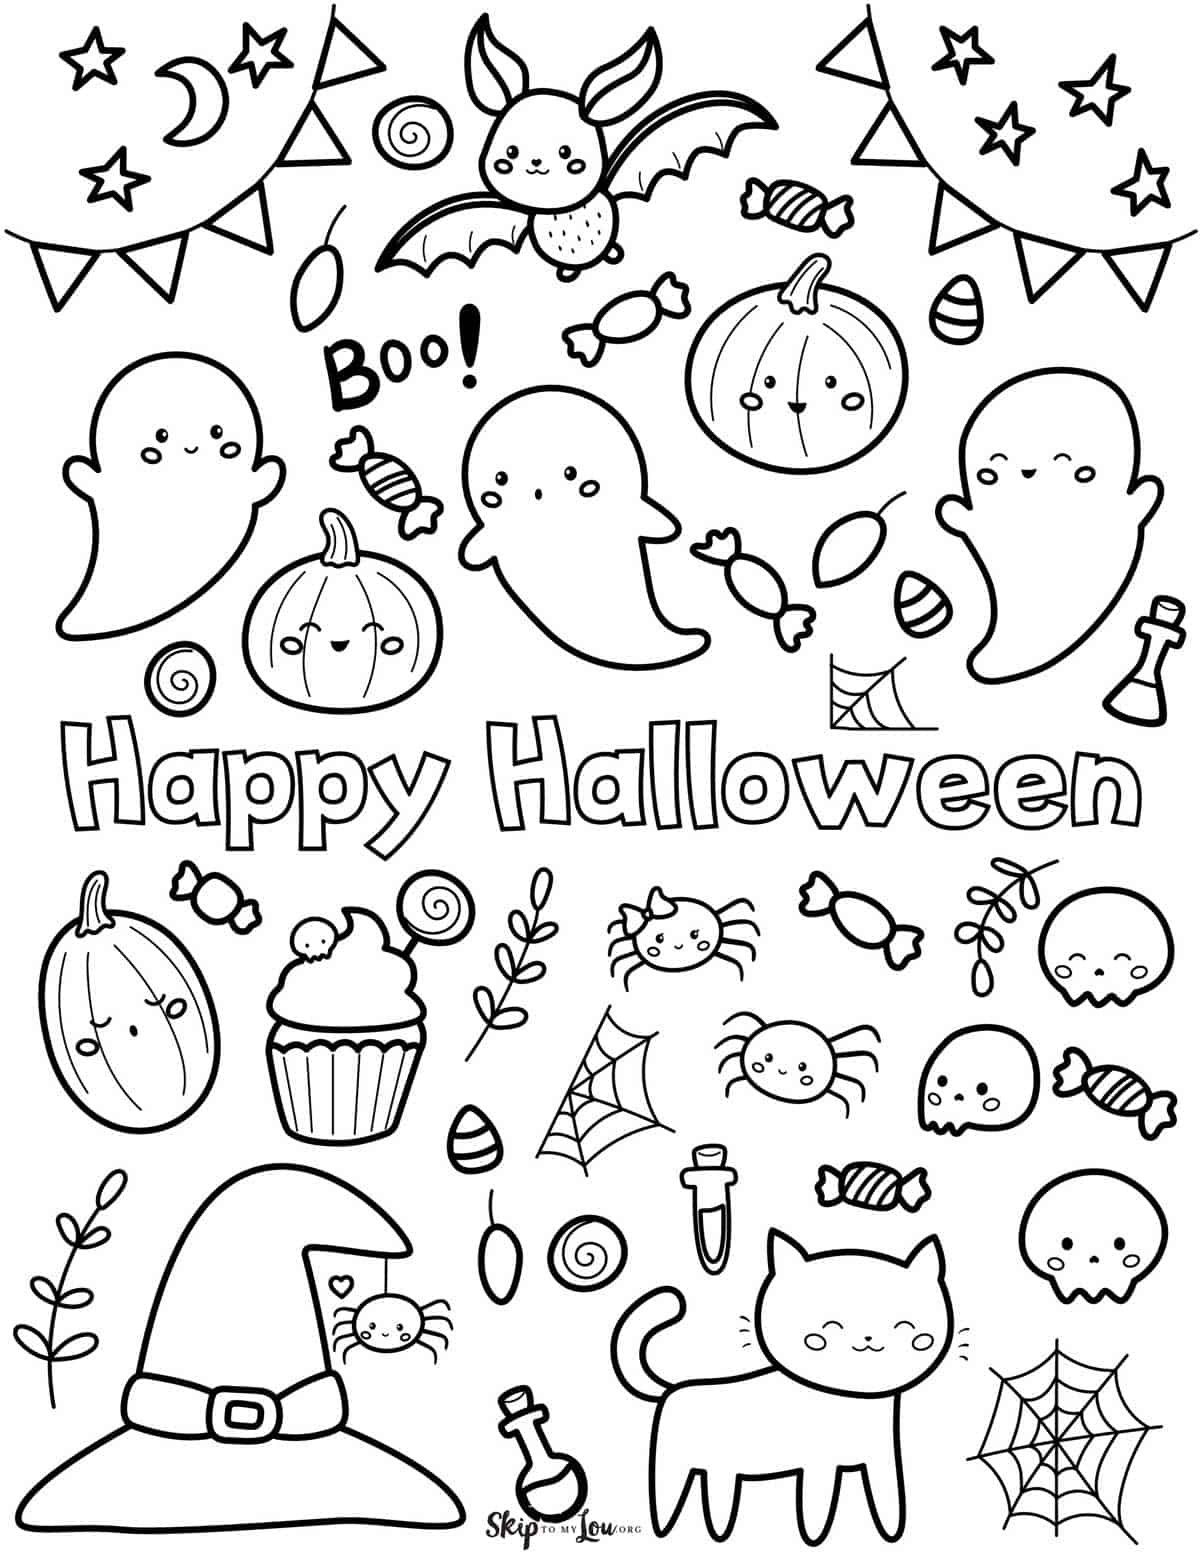 Coloring Pages | Happy Halloween Cute Drawings Coloring Page